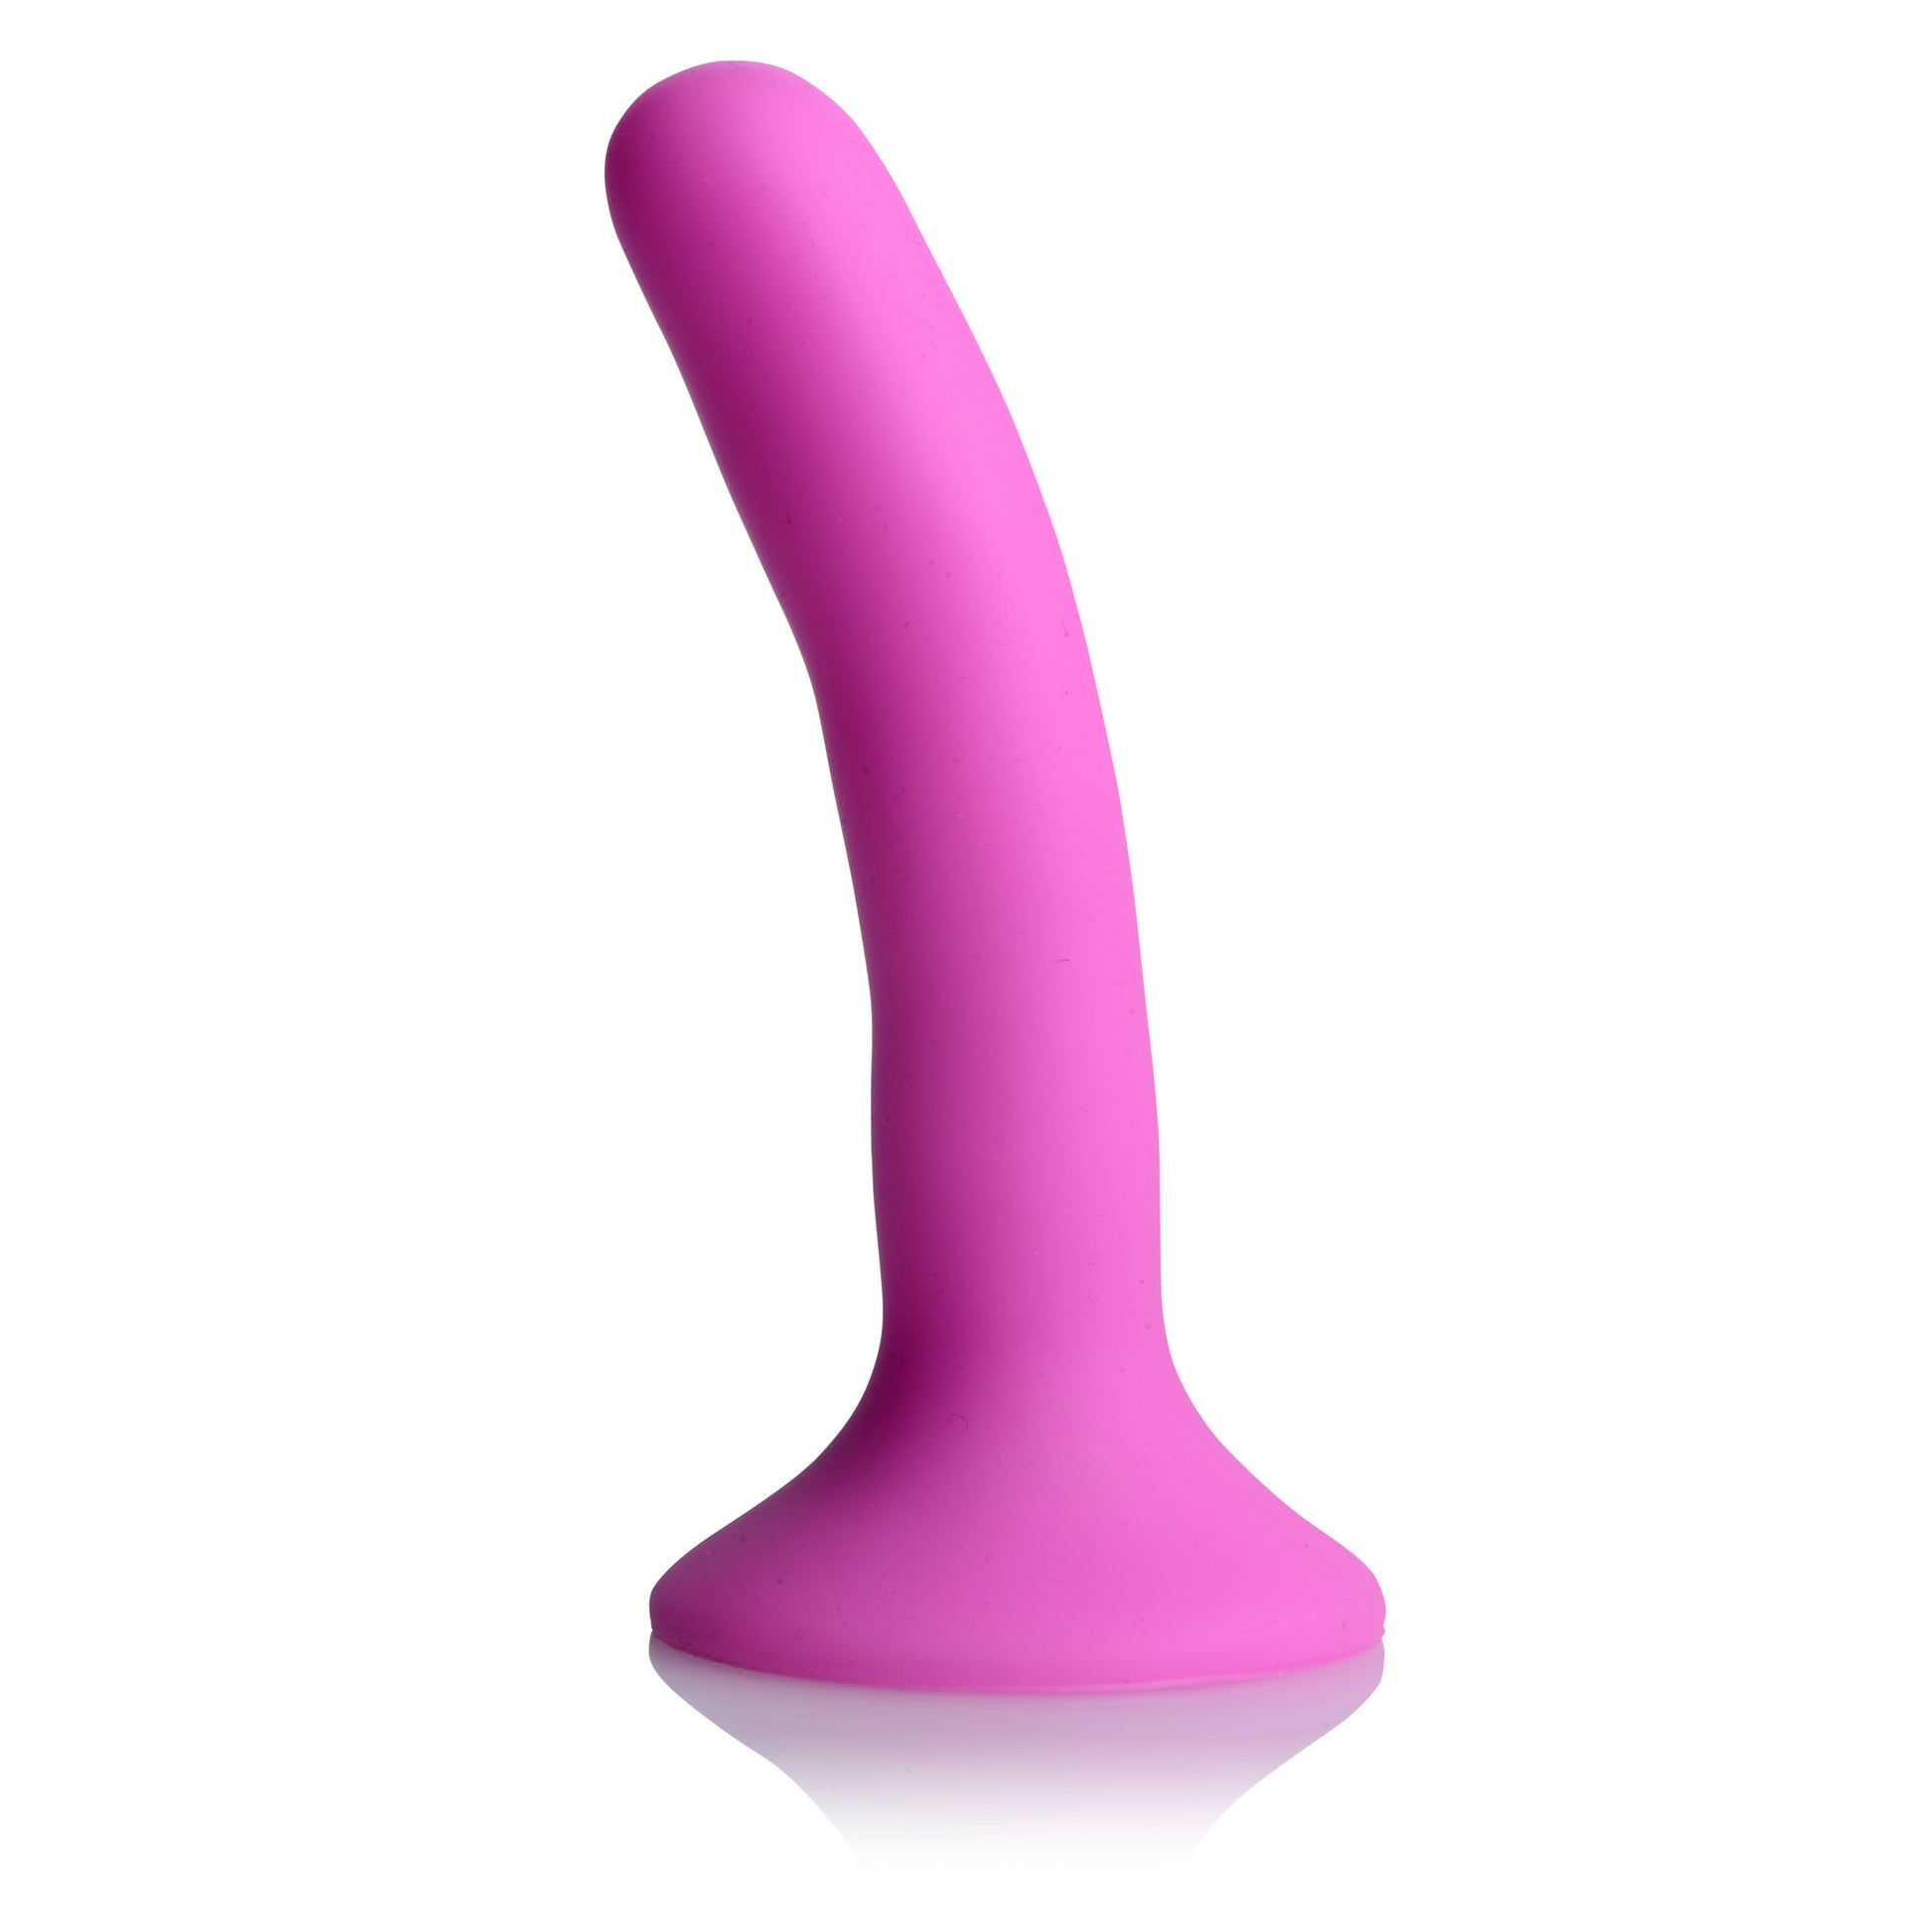 Pink Silicone Strap-On Dildo - Small - UABDSM